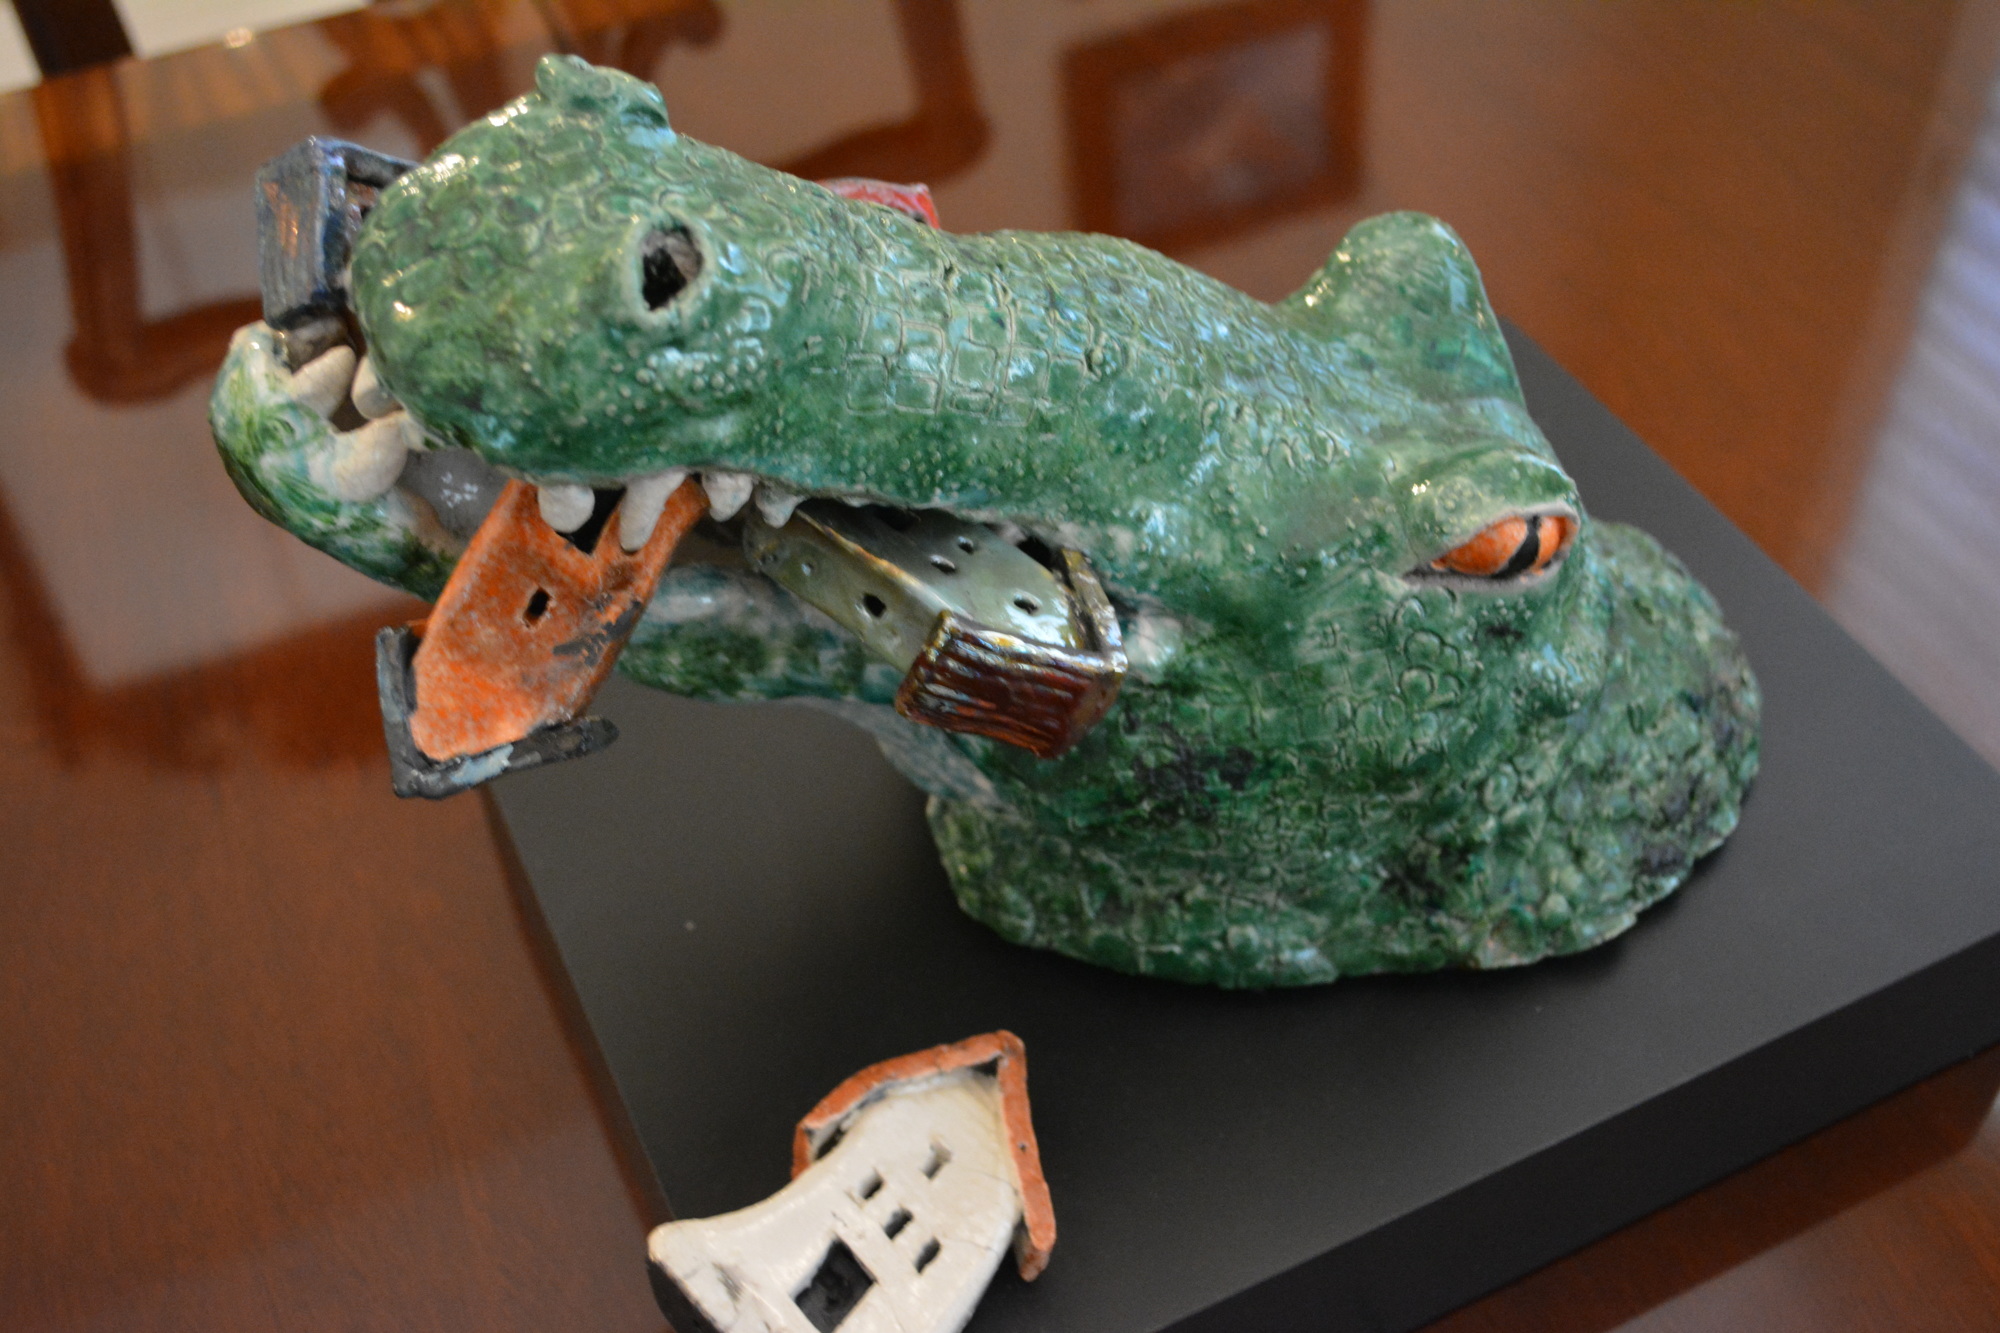 This alligator was made following Hurricane Irma and was meant to portray the hurricane, with houses being crushed in the alligator's mouth.